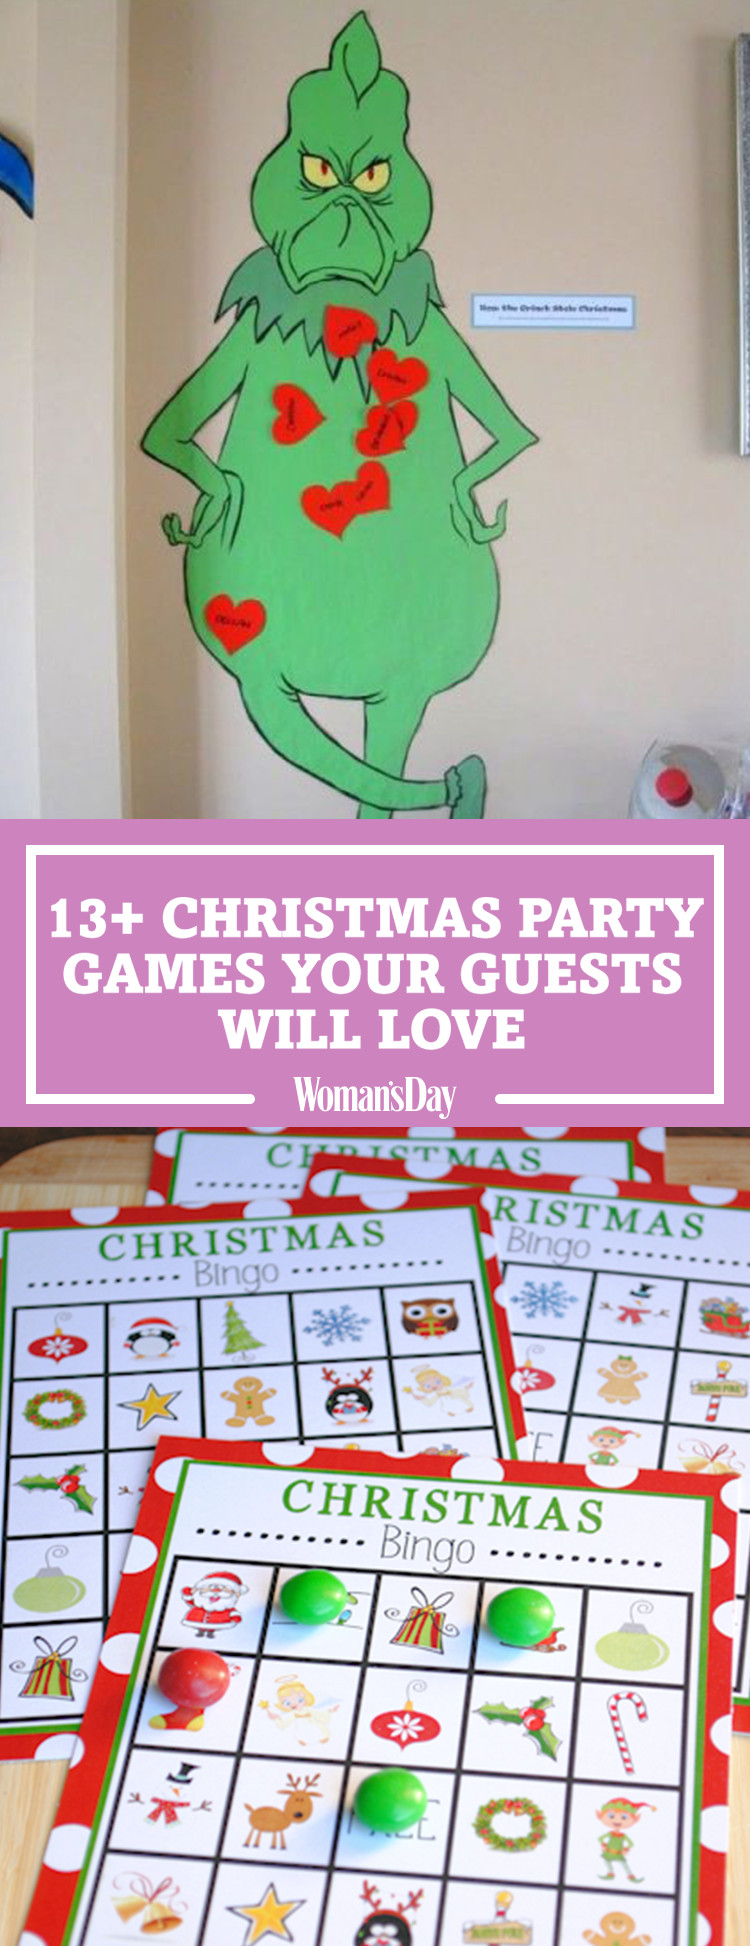 Christmas Party Games Ideas
 17 Fun Christmas Party Games for Kids DIY Holiday Party